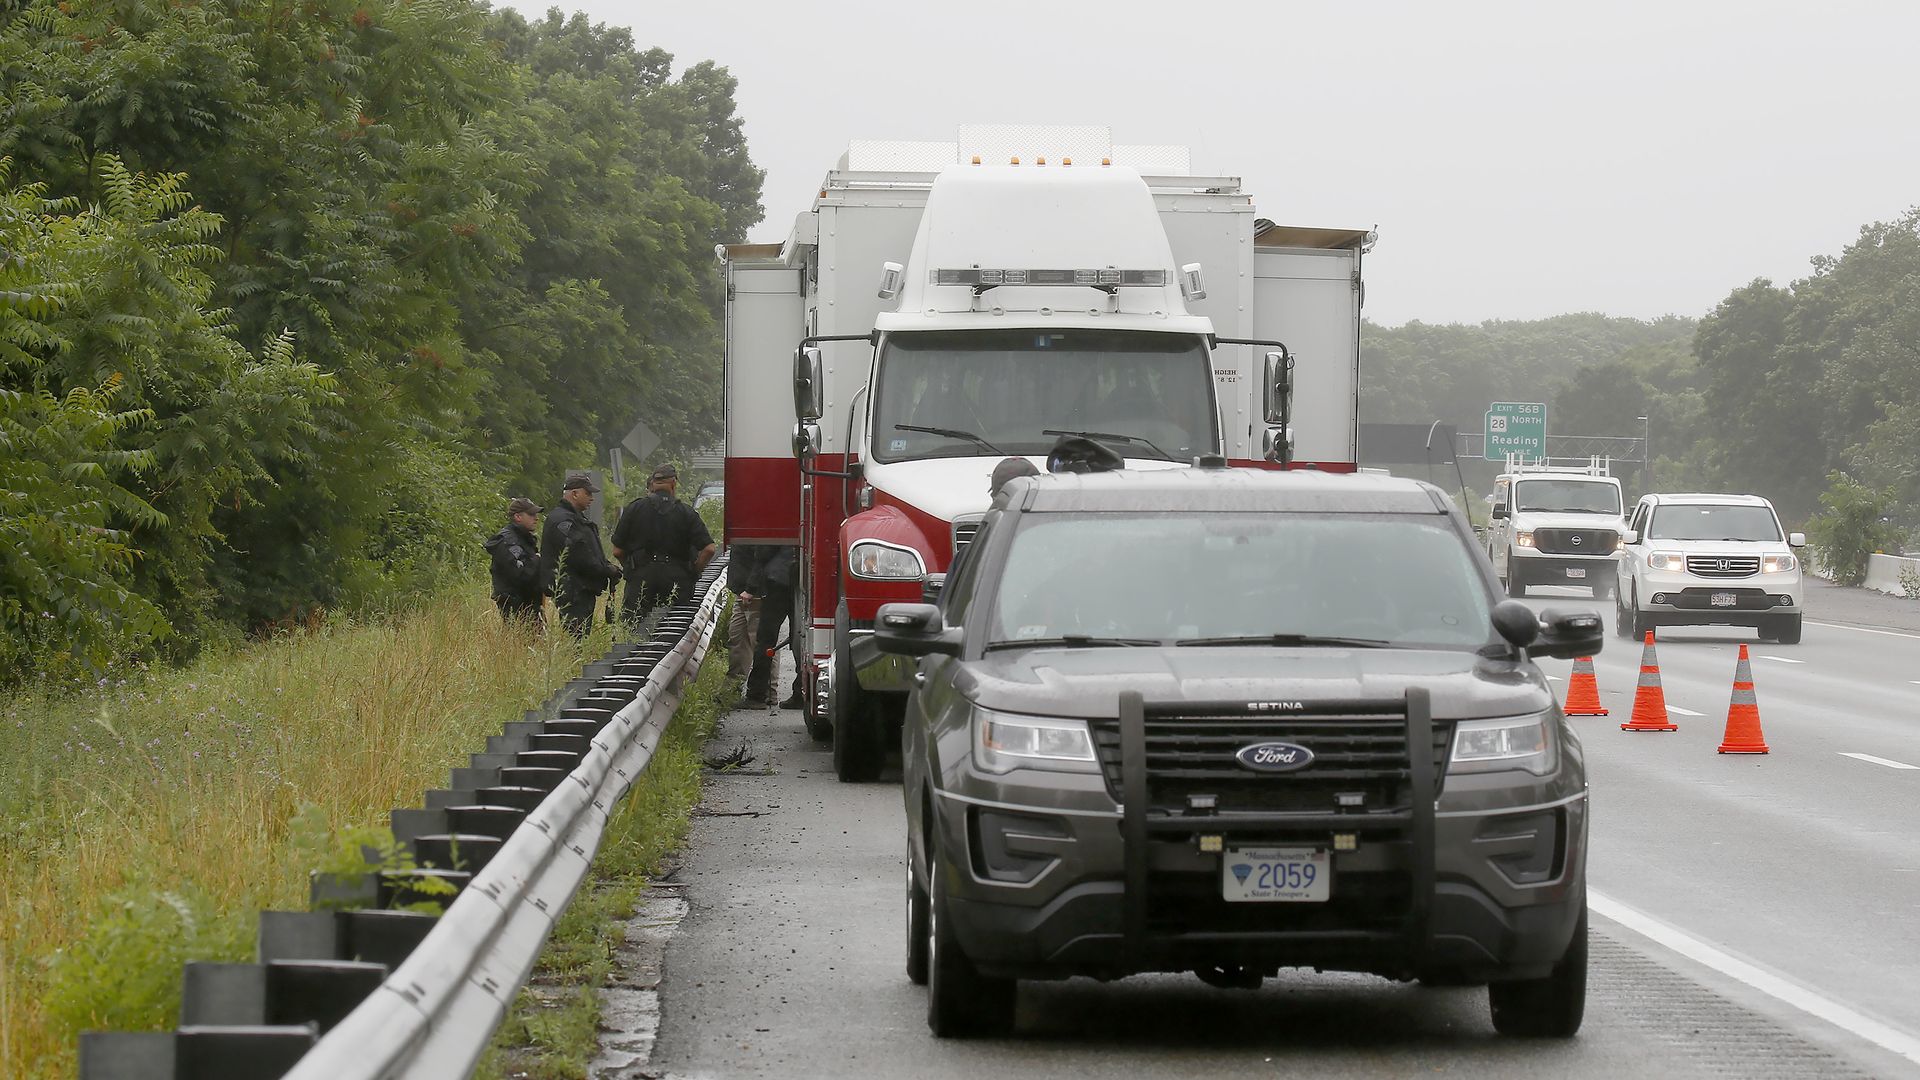 Interstate 95 in Wakefield is open as State Police stand along the guardrail near miler marker 57 as the investigation continues into an armed stand off with police, July 3, 2021 Wakefield, MA. (